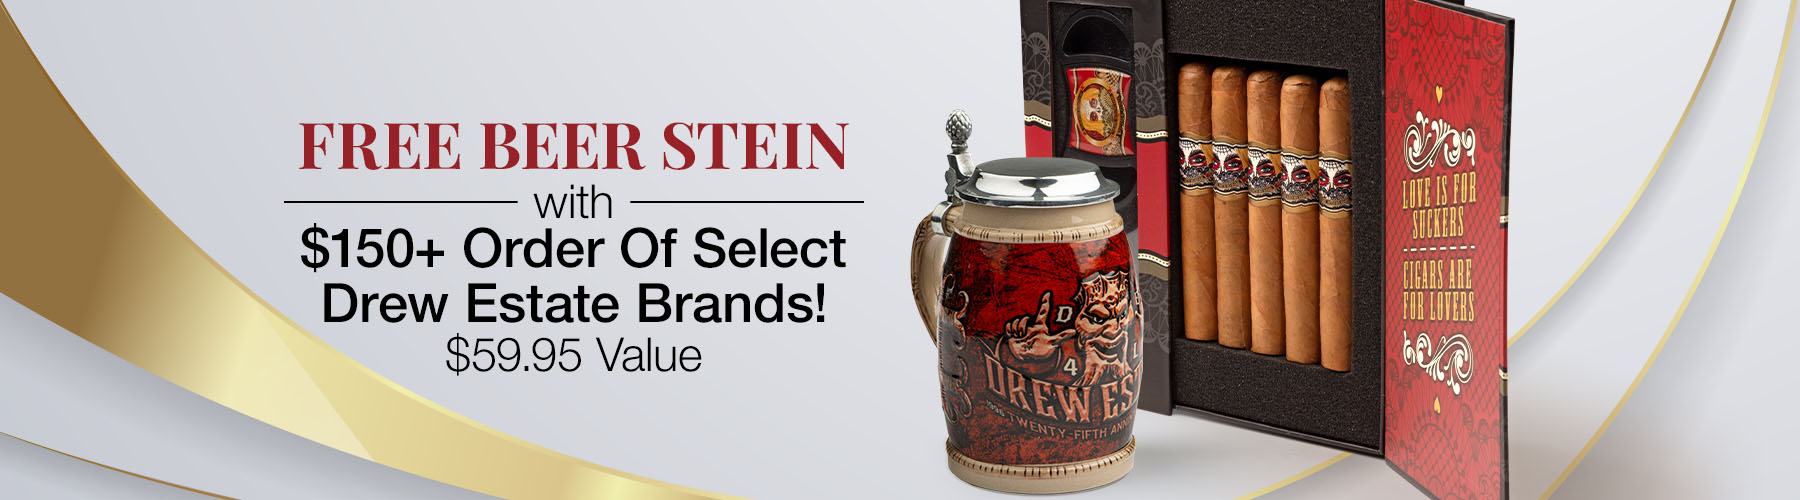 Free beer stein with $150+ orders of select Drew Estate brands! $59.95 VALUE